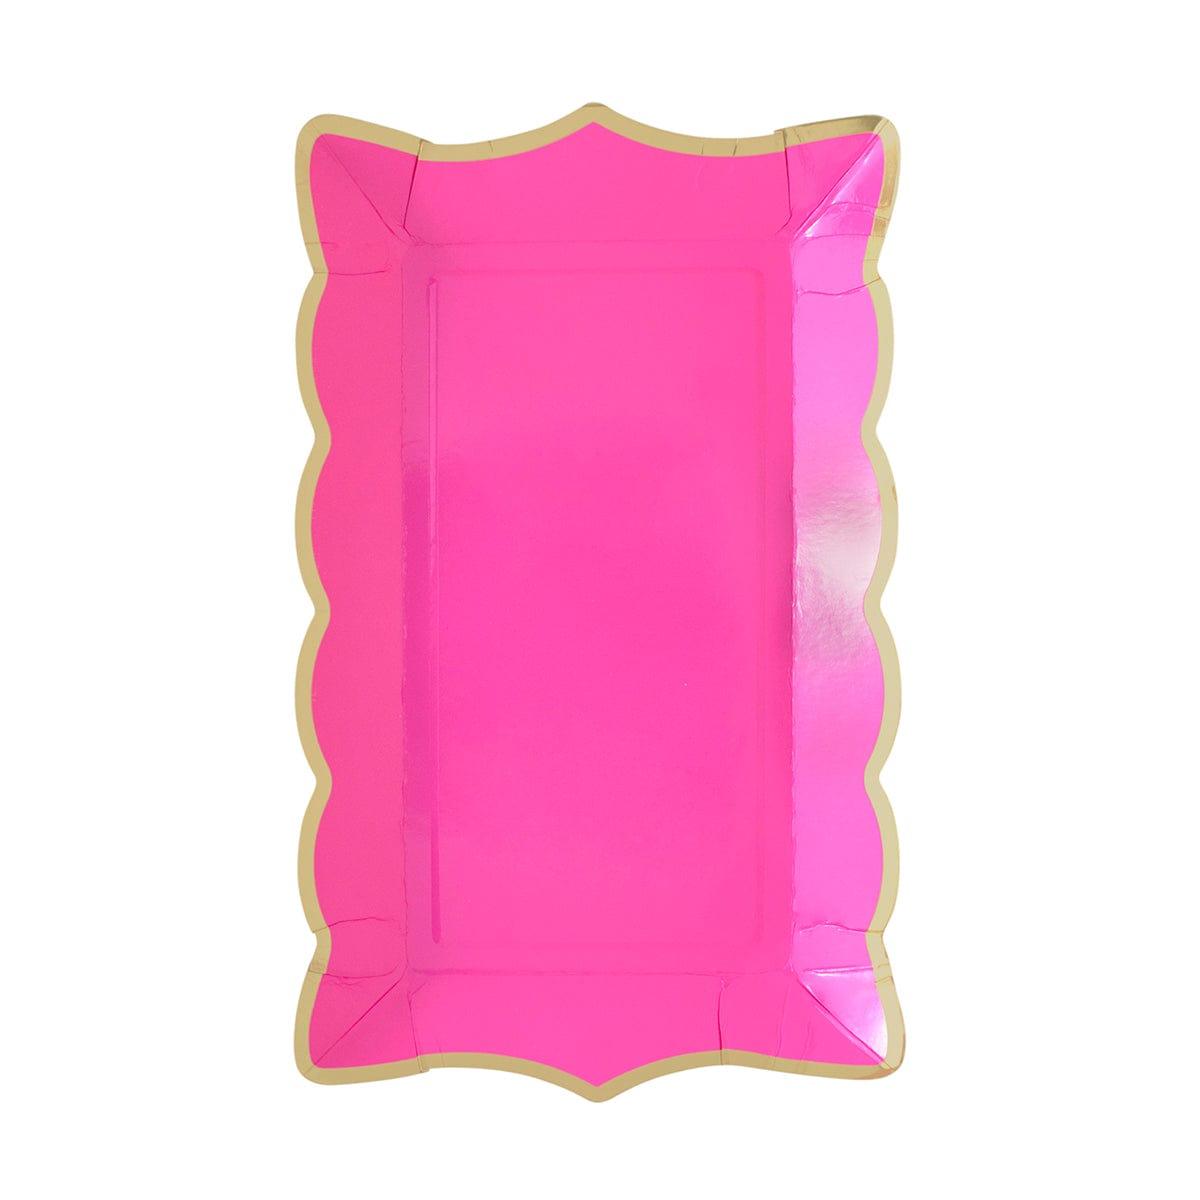 YIWU SANDY PAPER PRODUCTS CO., LTD Everyday Entertaining Hot Pink Rectangular Trays, 9 Inches, 4 Count